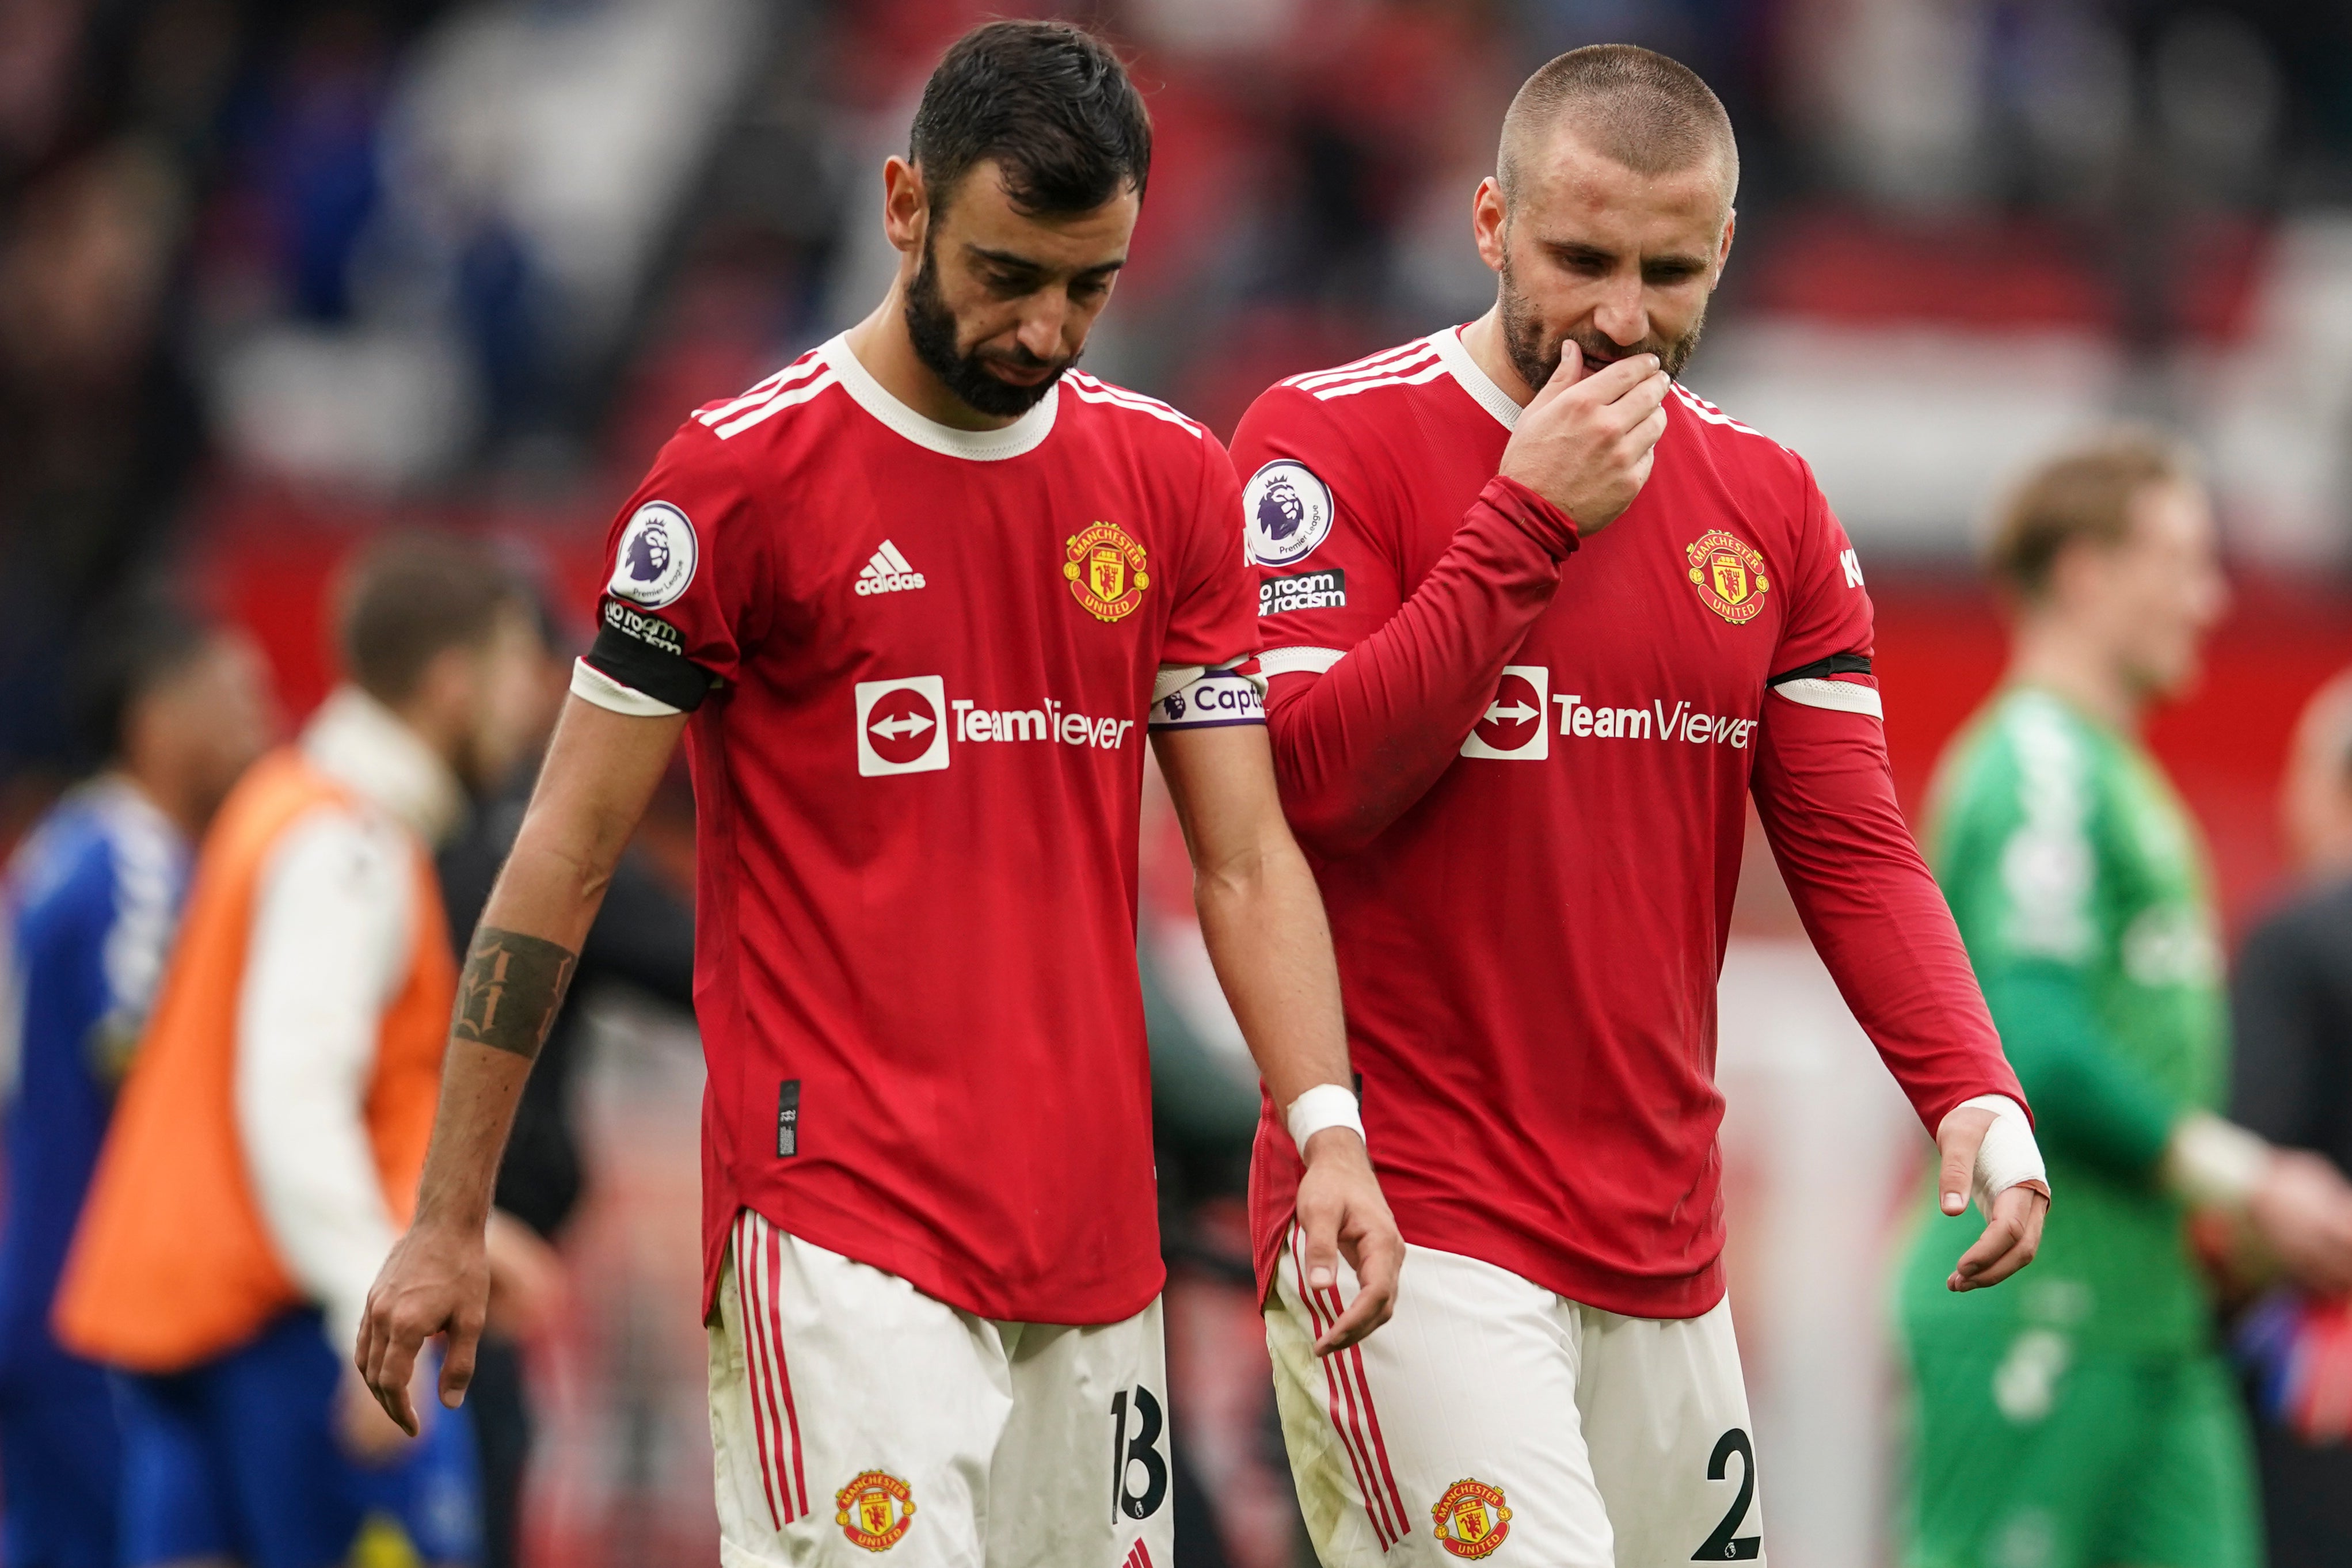 Bruno Fernandes (left) leaves the field with Luke Shaw after the 1-1 draw with Everton